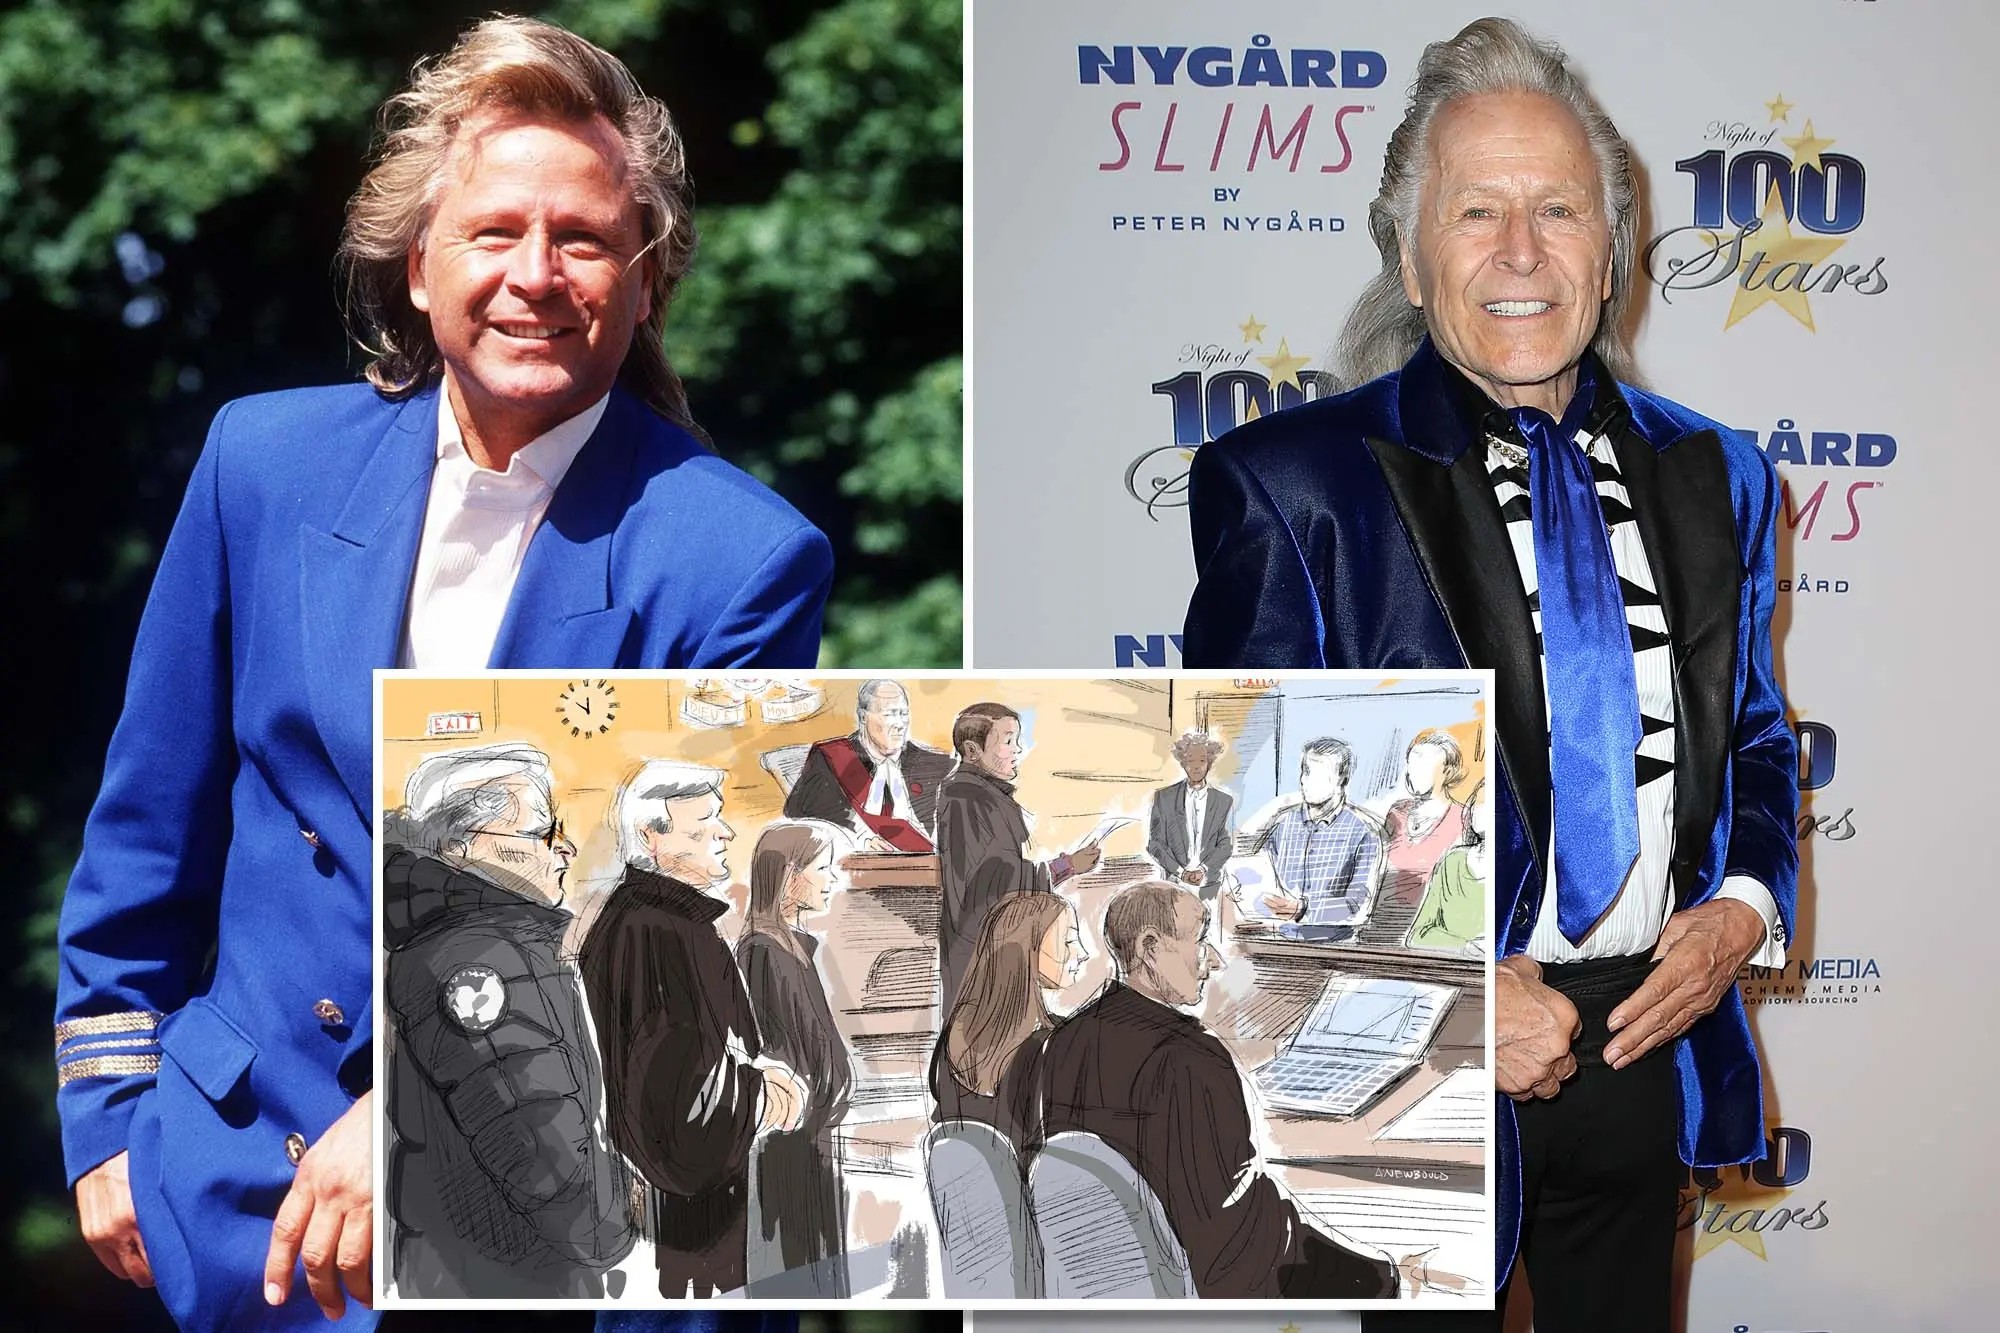 Peter Nygard Guilty: The Sexual Abuse